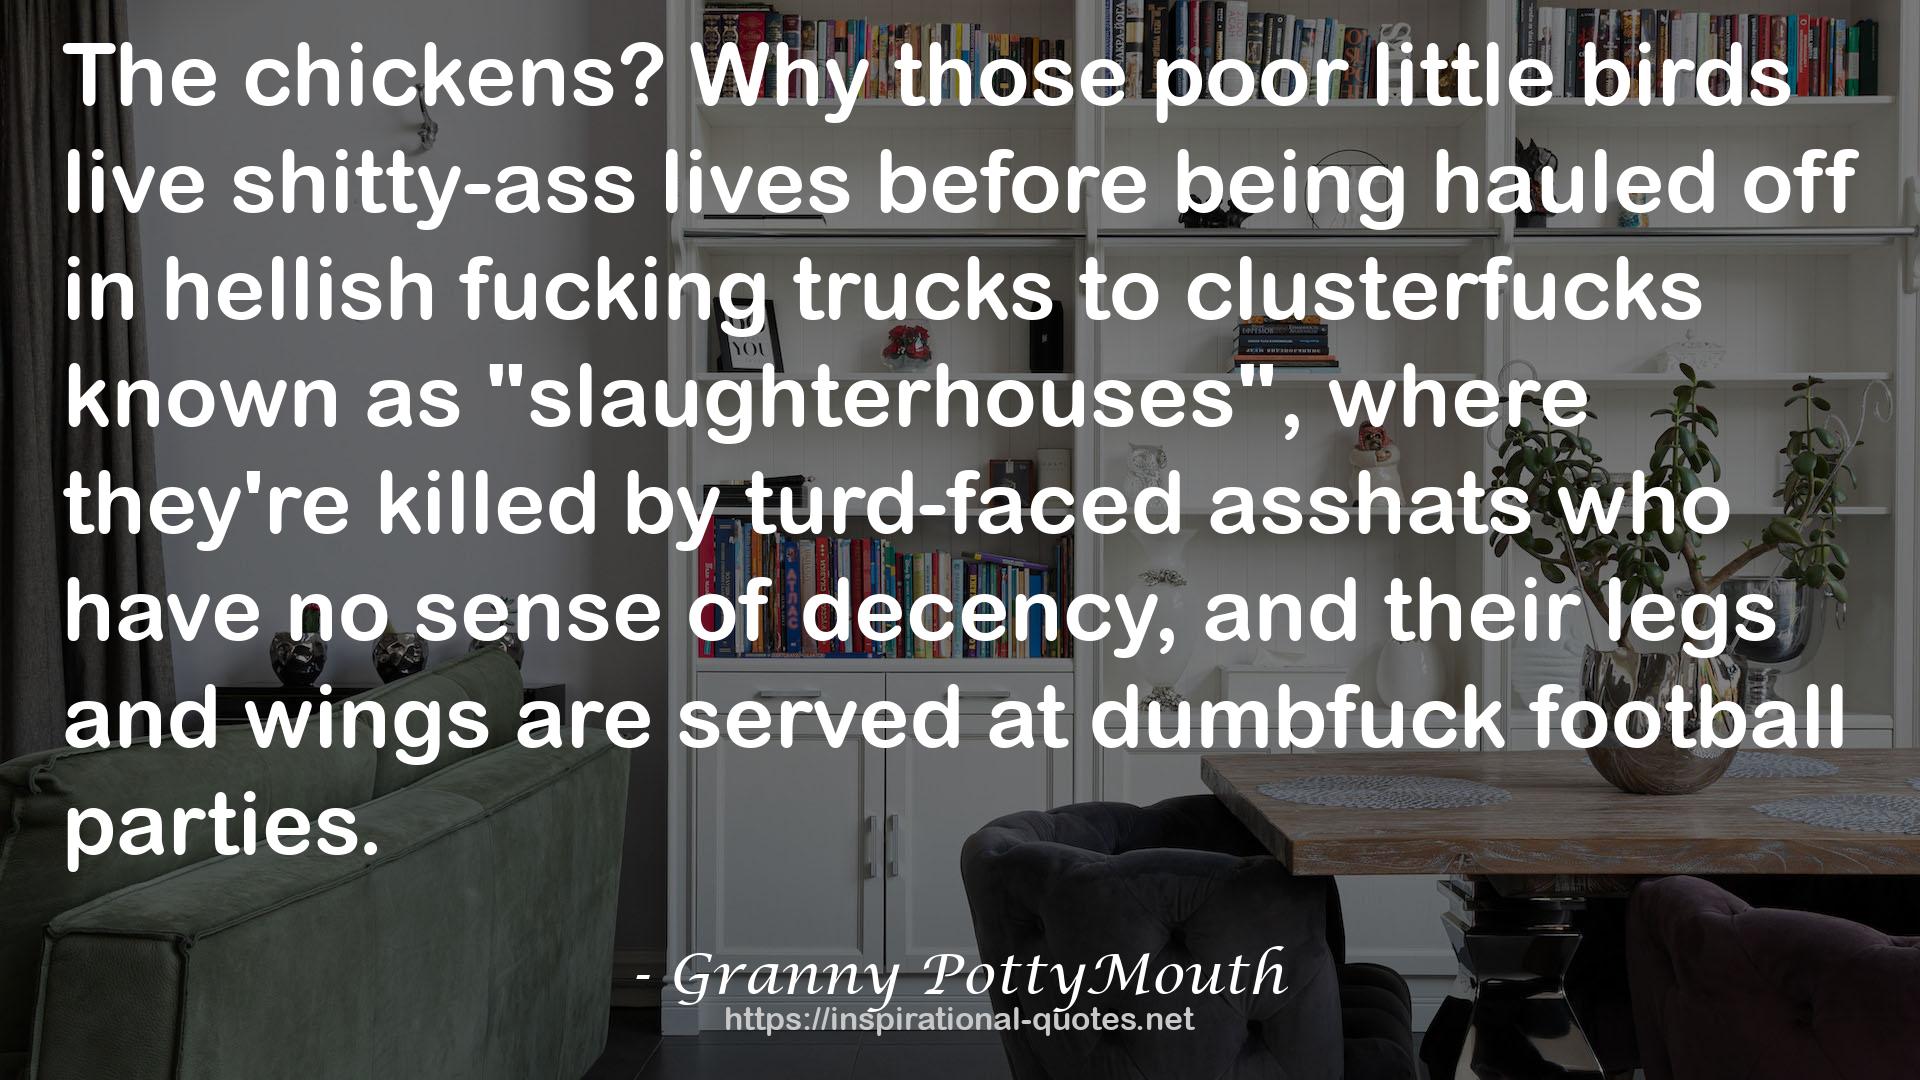 Granny PottyMouth QUOTES